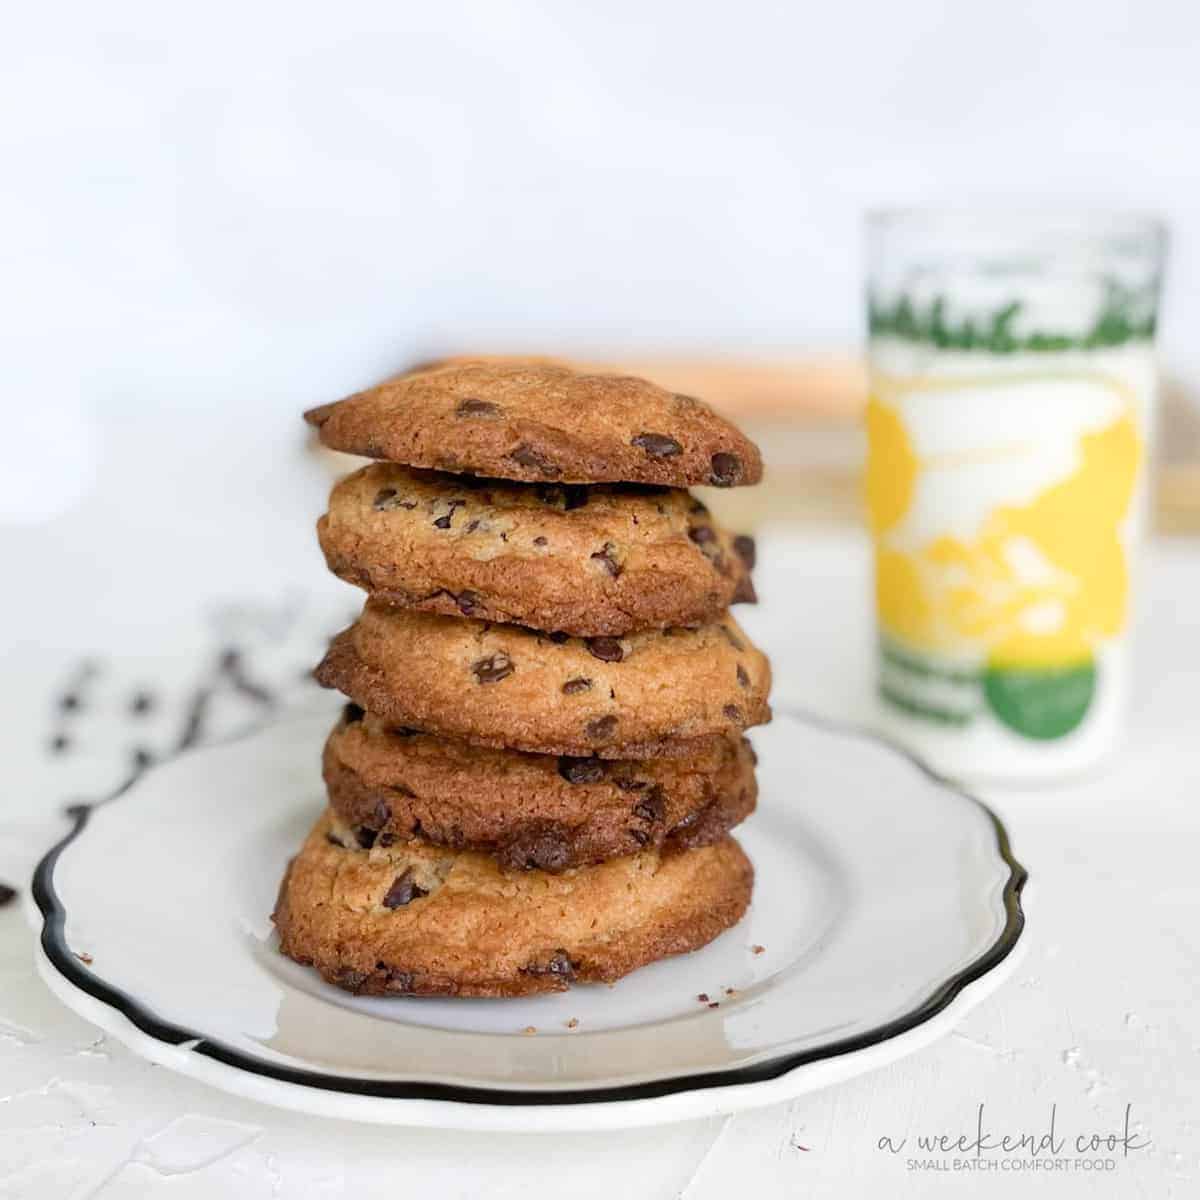 Small Batch Bisquick Chocolate Chip Cookies